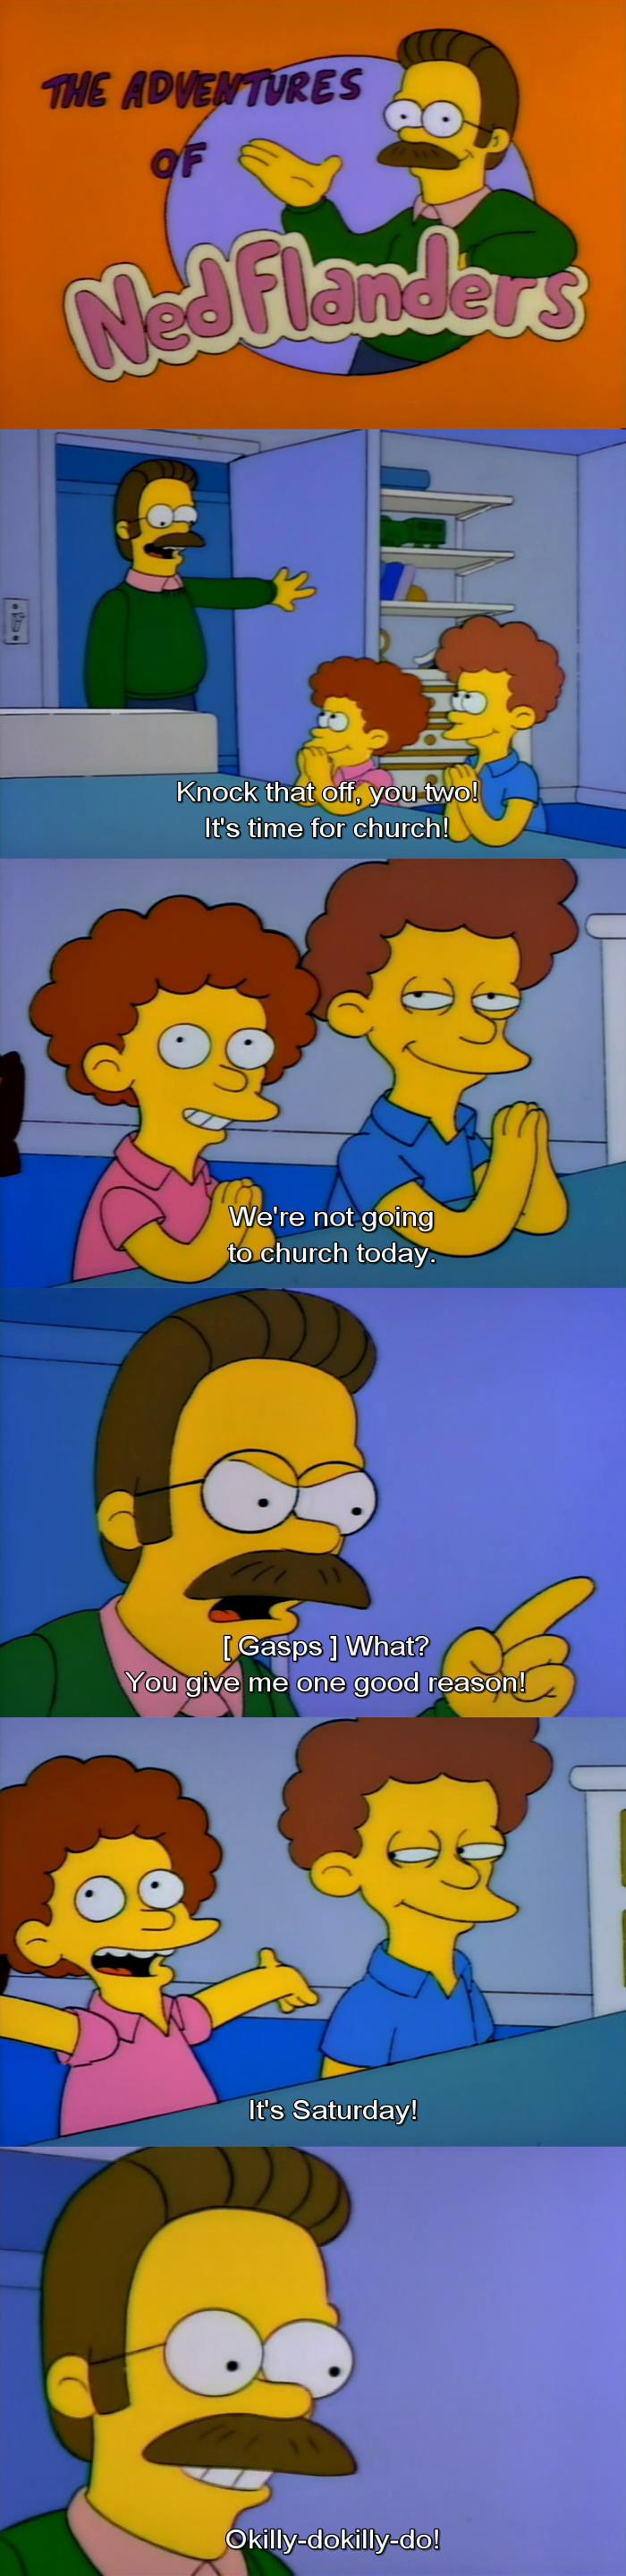 The Adventures of Ned Flanders